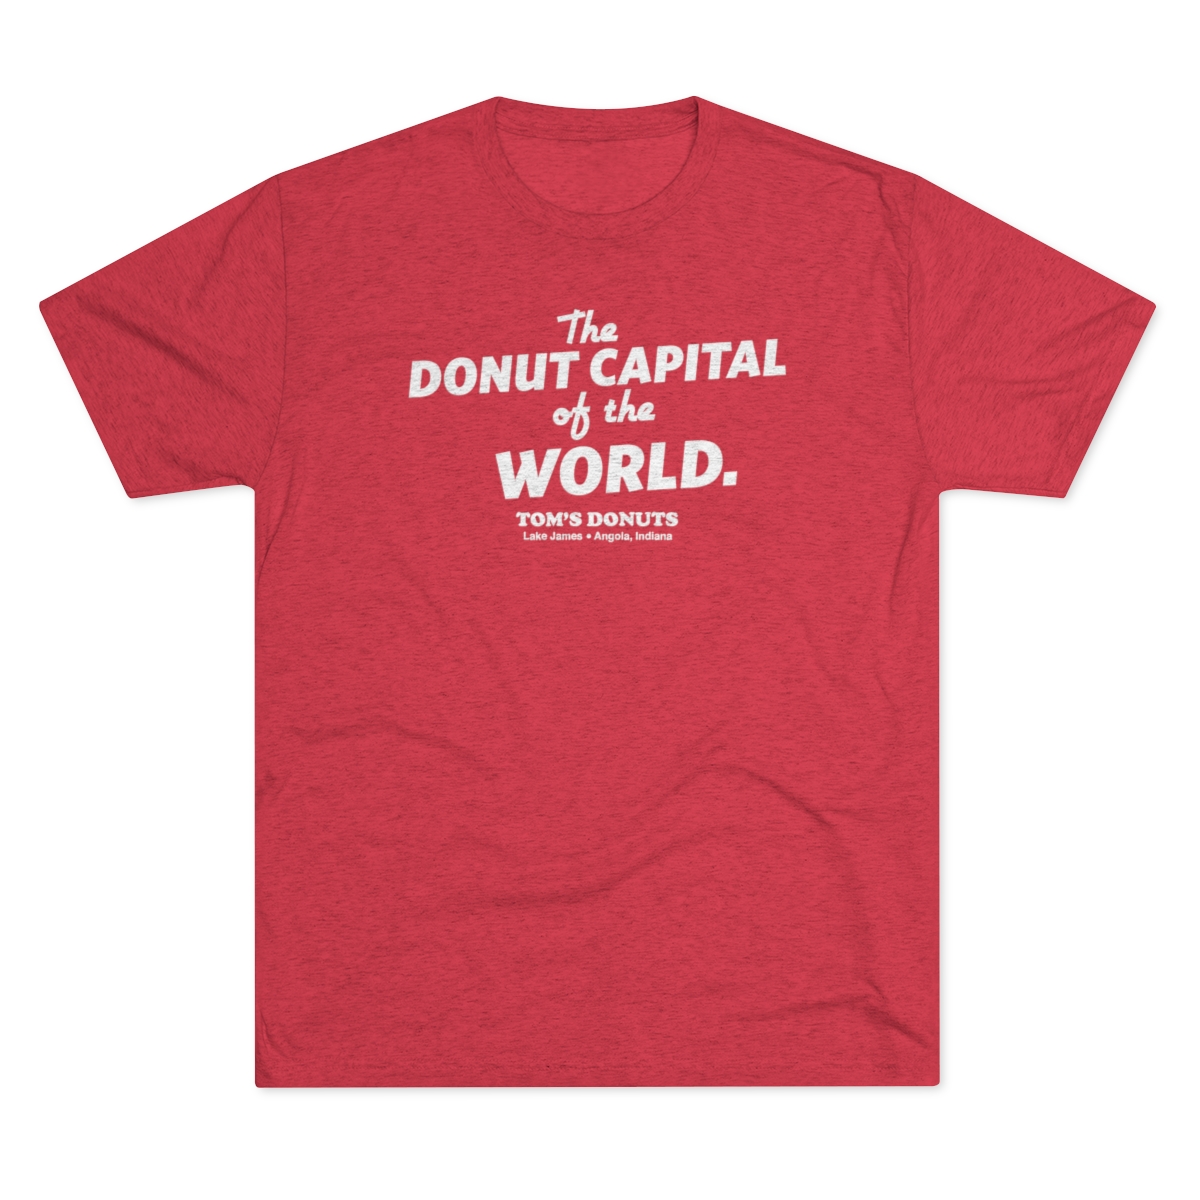 Tom’s Donut Original “The Donut Capital Of The World” T-shirts